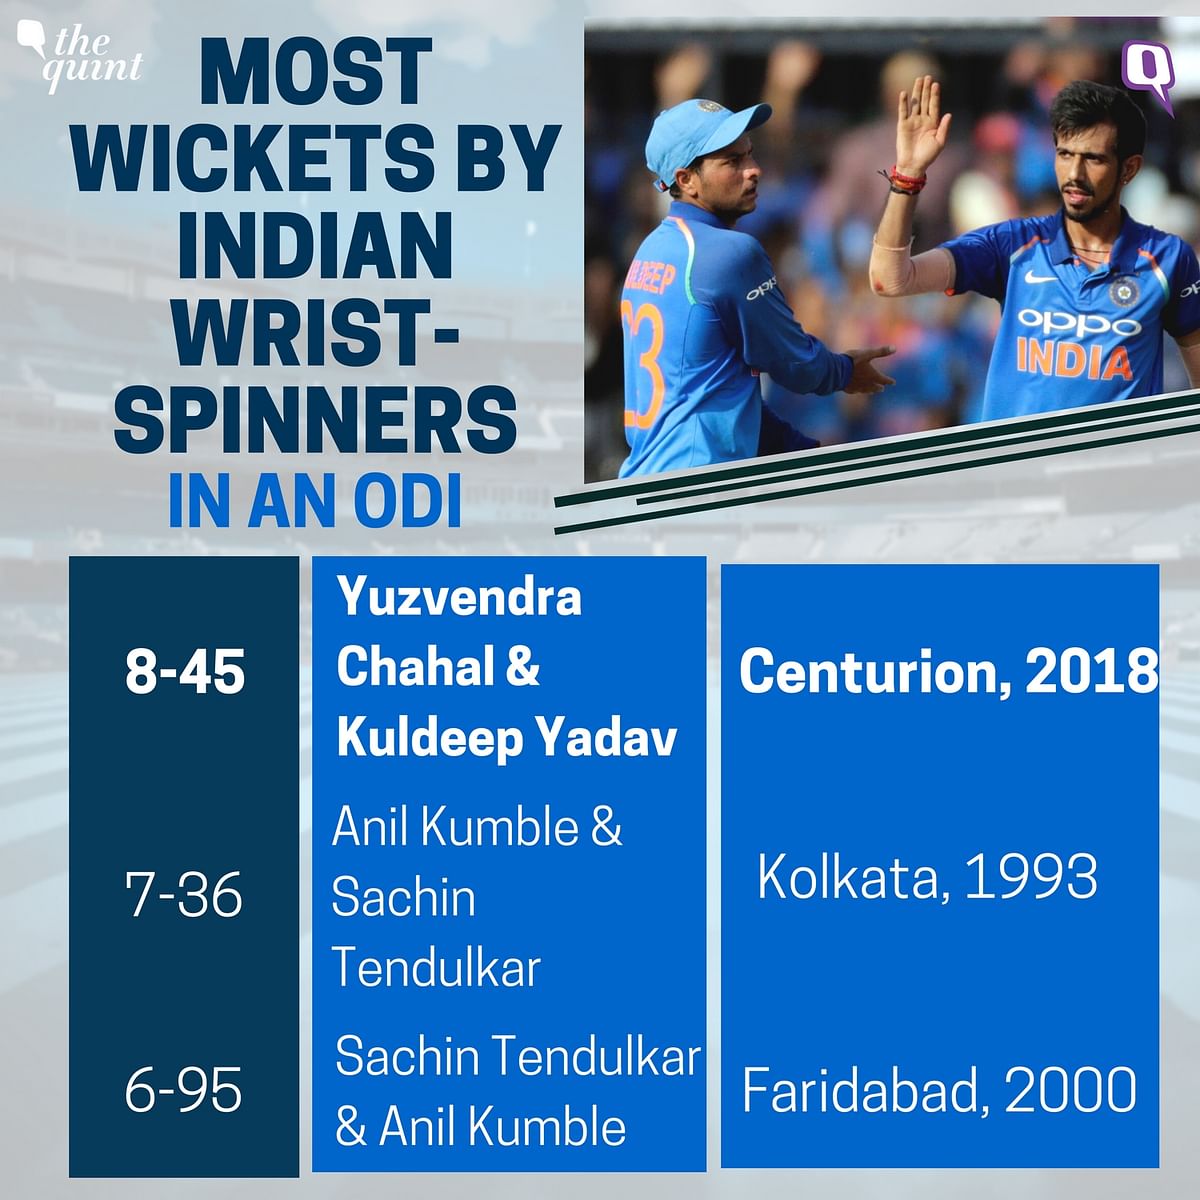 Yuzvendra Chahal returned with figures of 5 for 22, while Kuldeep Yadav (3/20) accounted for three wickets.